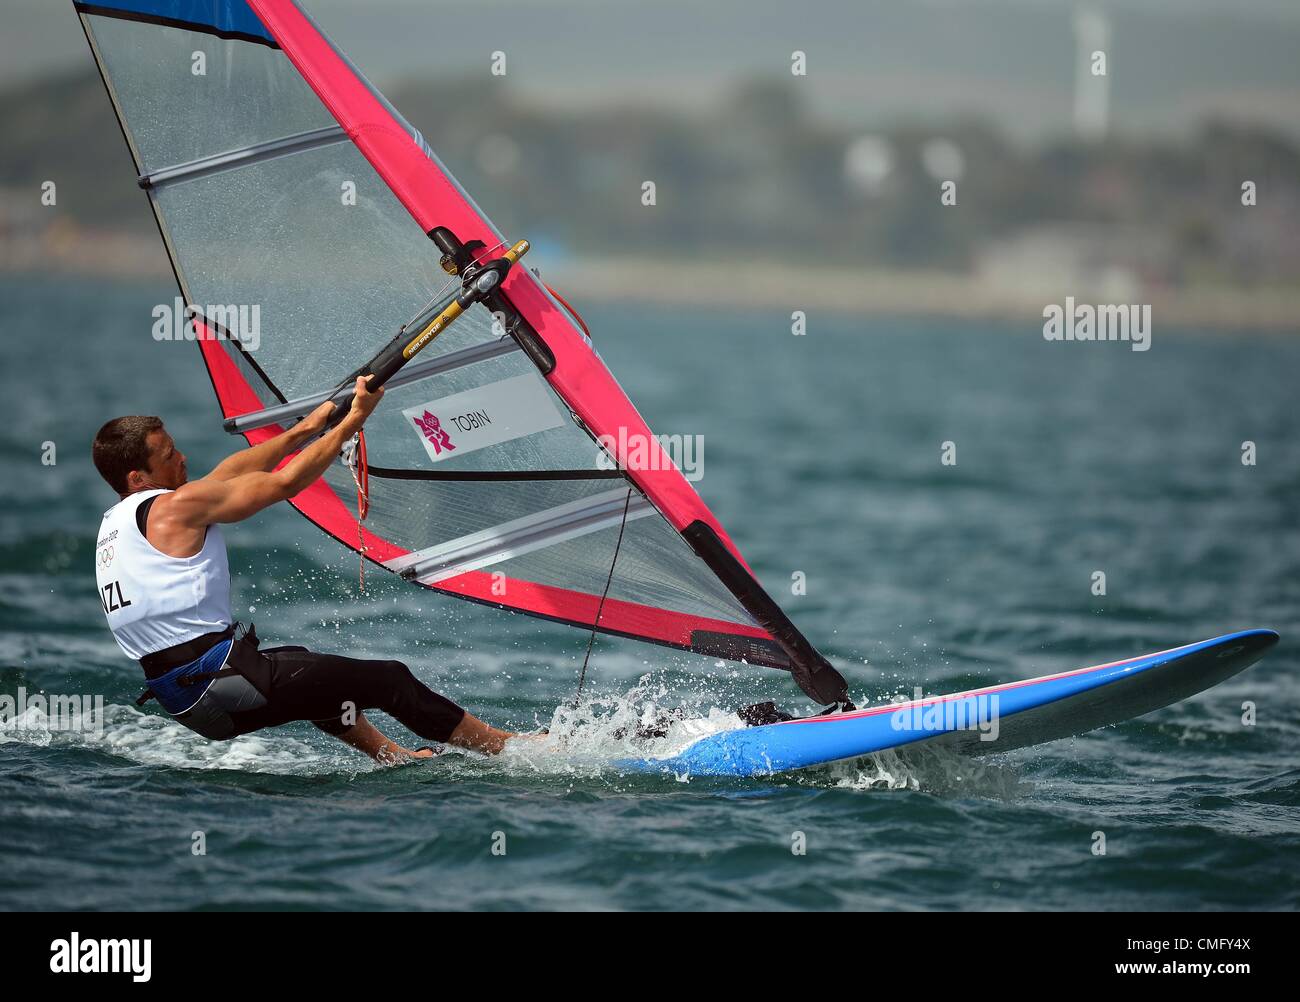 Olympic Sailing, action during the London 2012 Olympic Games at the Weymouth & Portland Venue, Dorset, Britain, UK.  Jon-Paul Tobin of New Zealand in the Men's RS:X windsurfing class race August 4th, 2012 PICTURE: DORSET MEDIA SERVICE Stock Photo